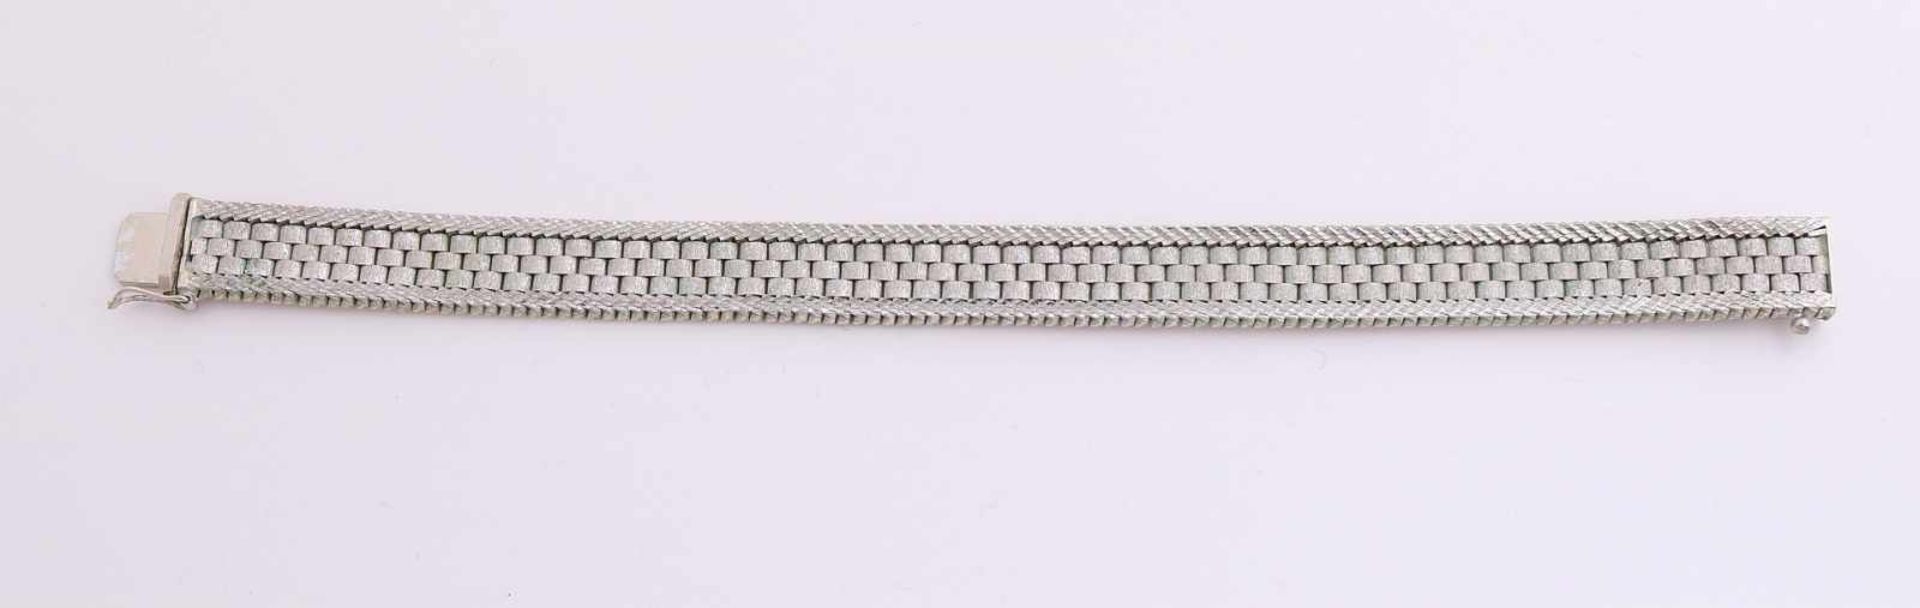 Elegant white gold bracelet, 585/000, broad model with brick links in the center and along the edges - Image 2 of 2